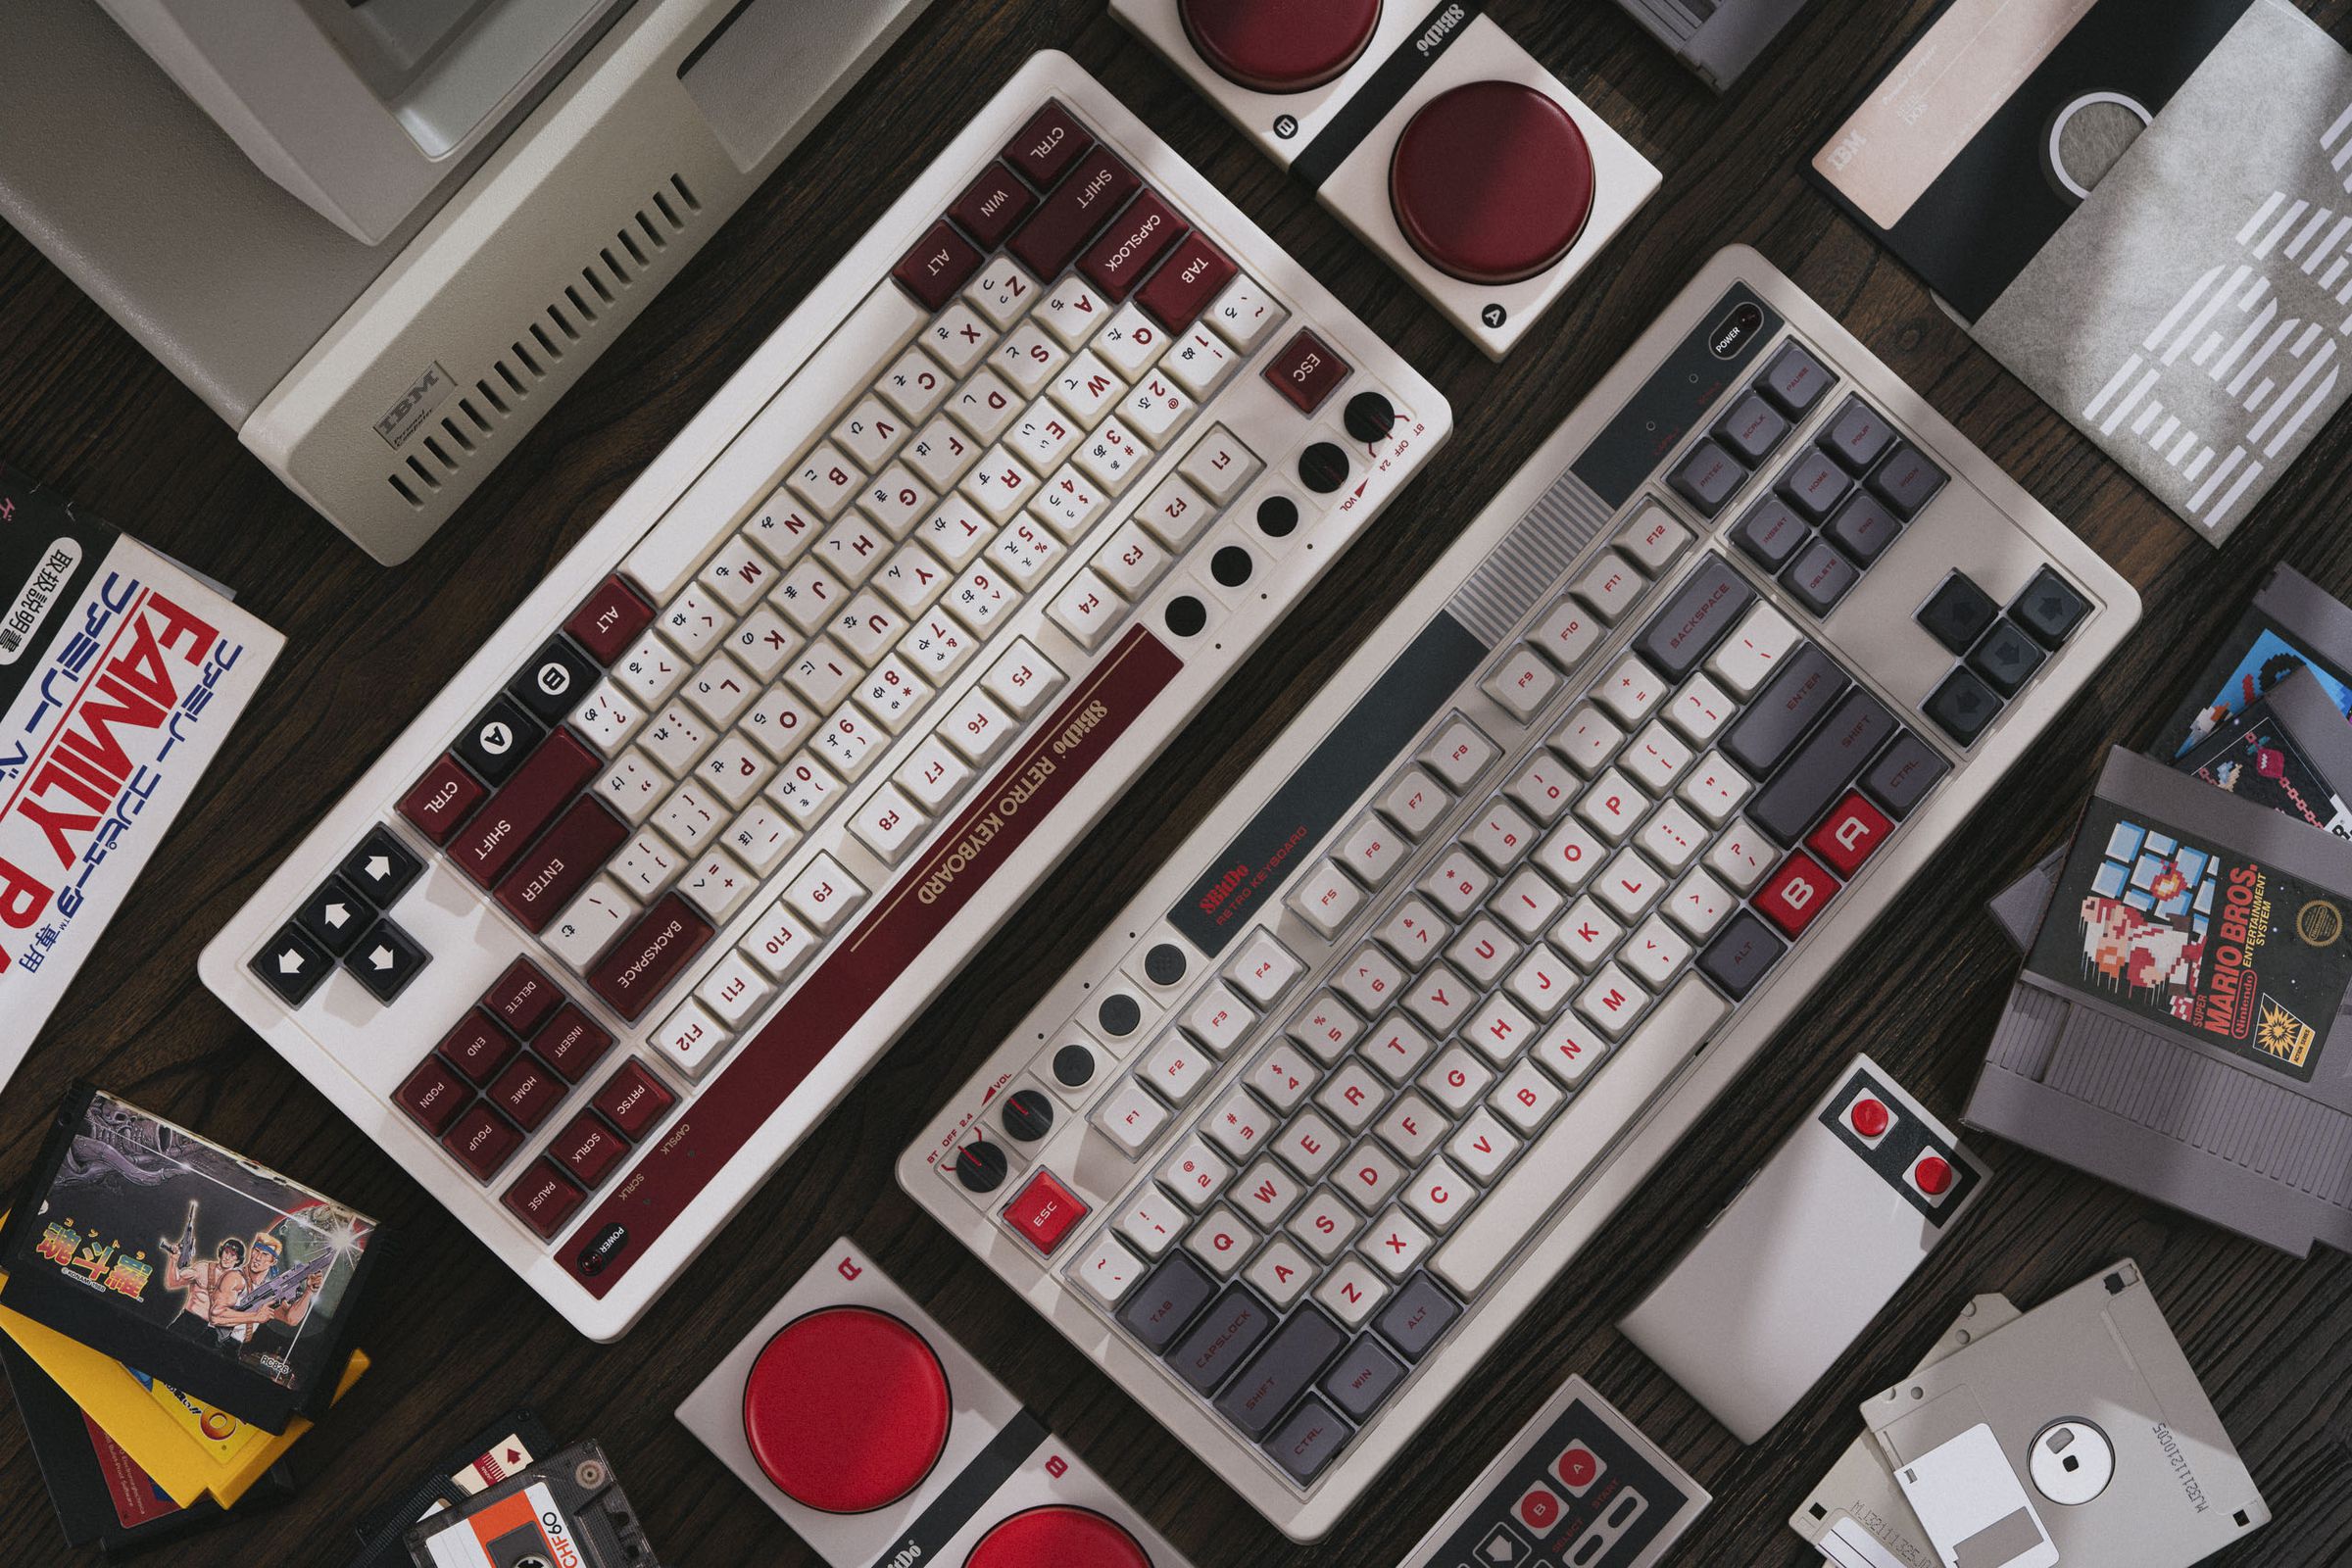 Two keyboards in a sea of retro tech and Nintendo paraphernalia.